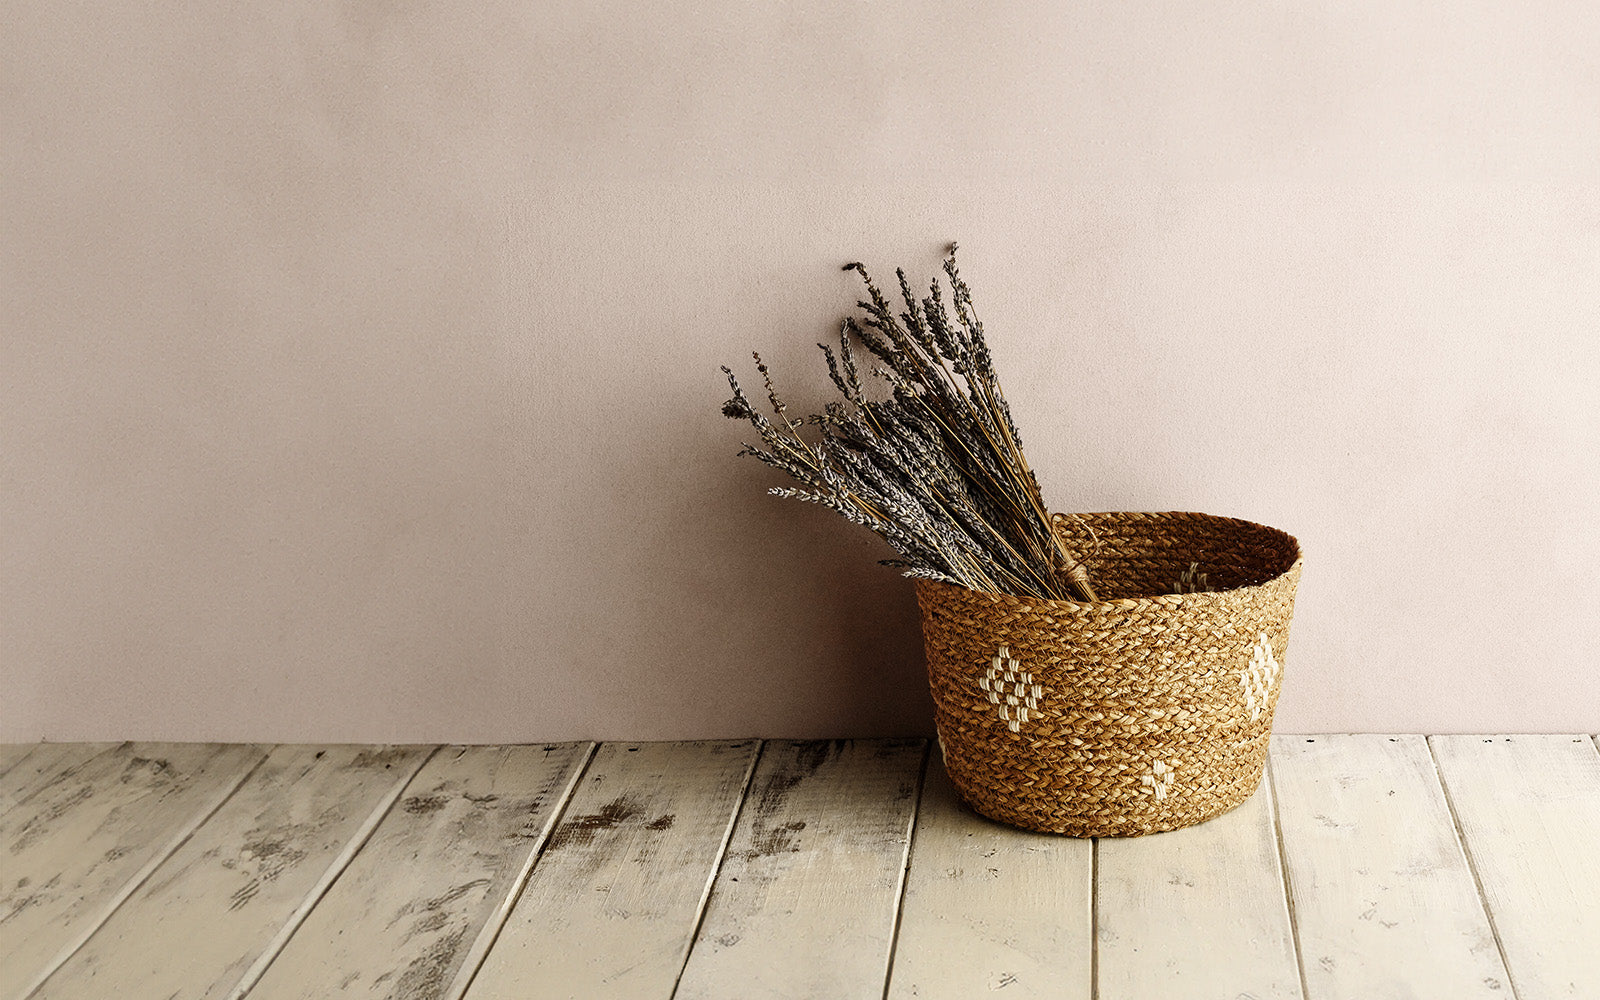 Handmade basket on a wooden floor against a wall, with a bunch of lavender inside